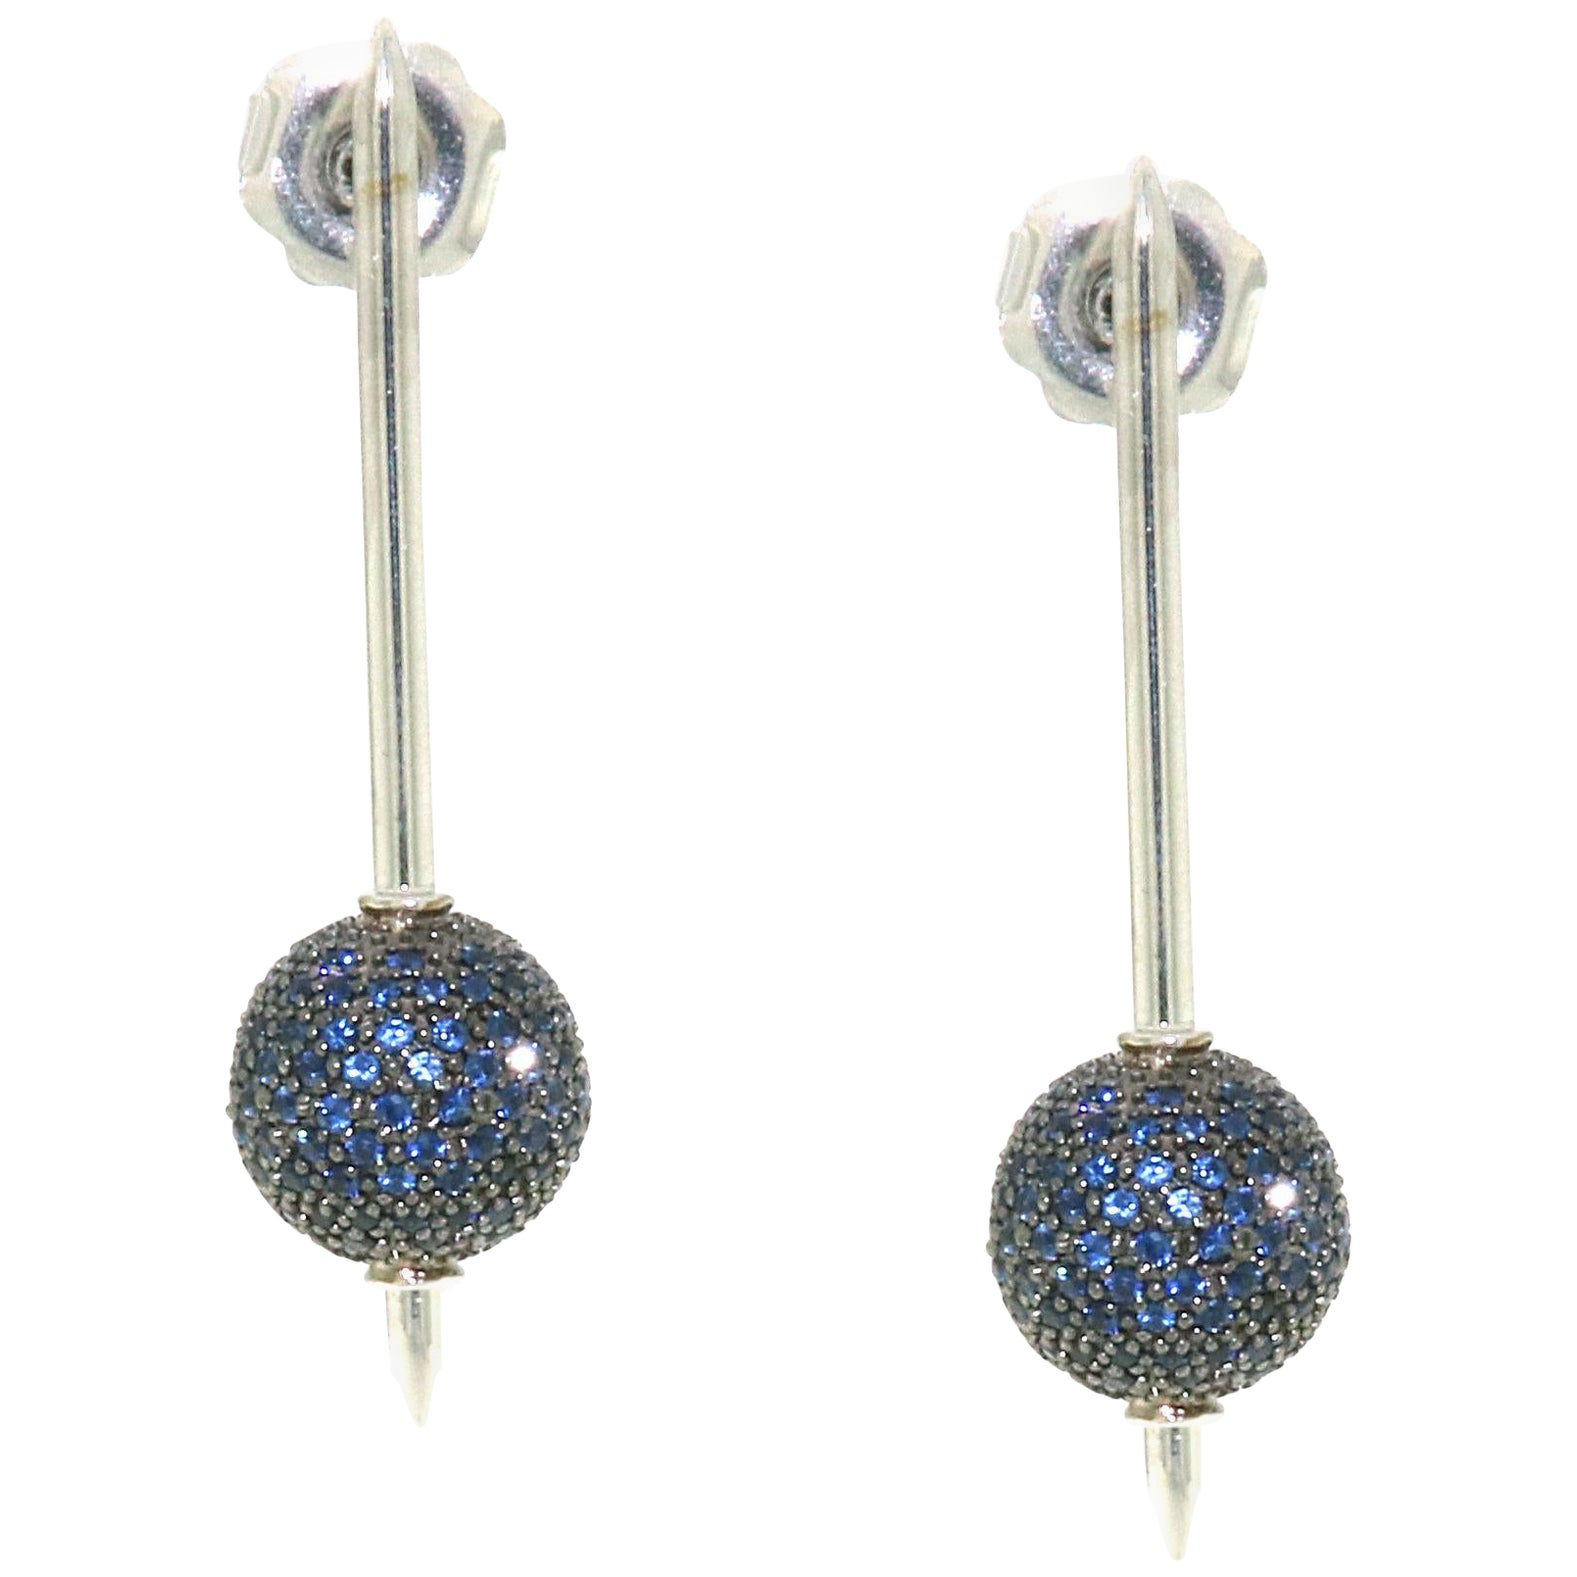 Sapphire Pave Diamond Ball Earring Made in Gold